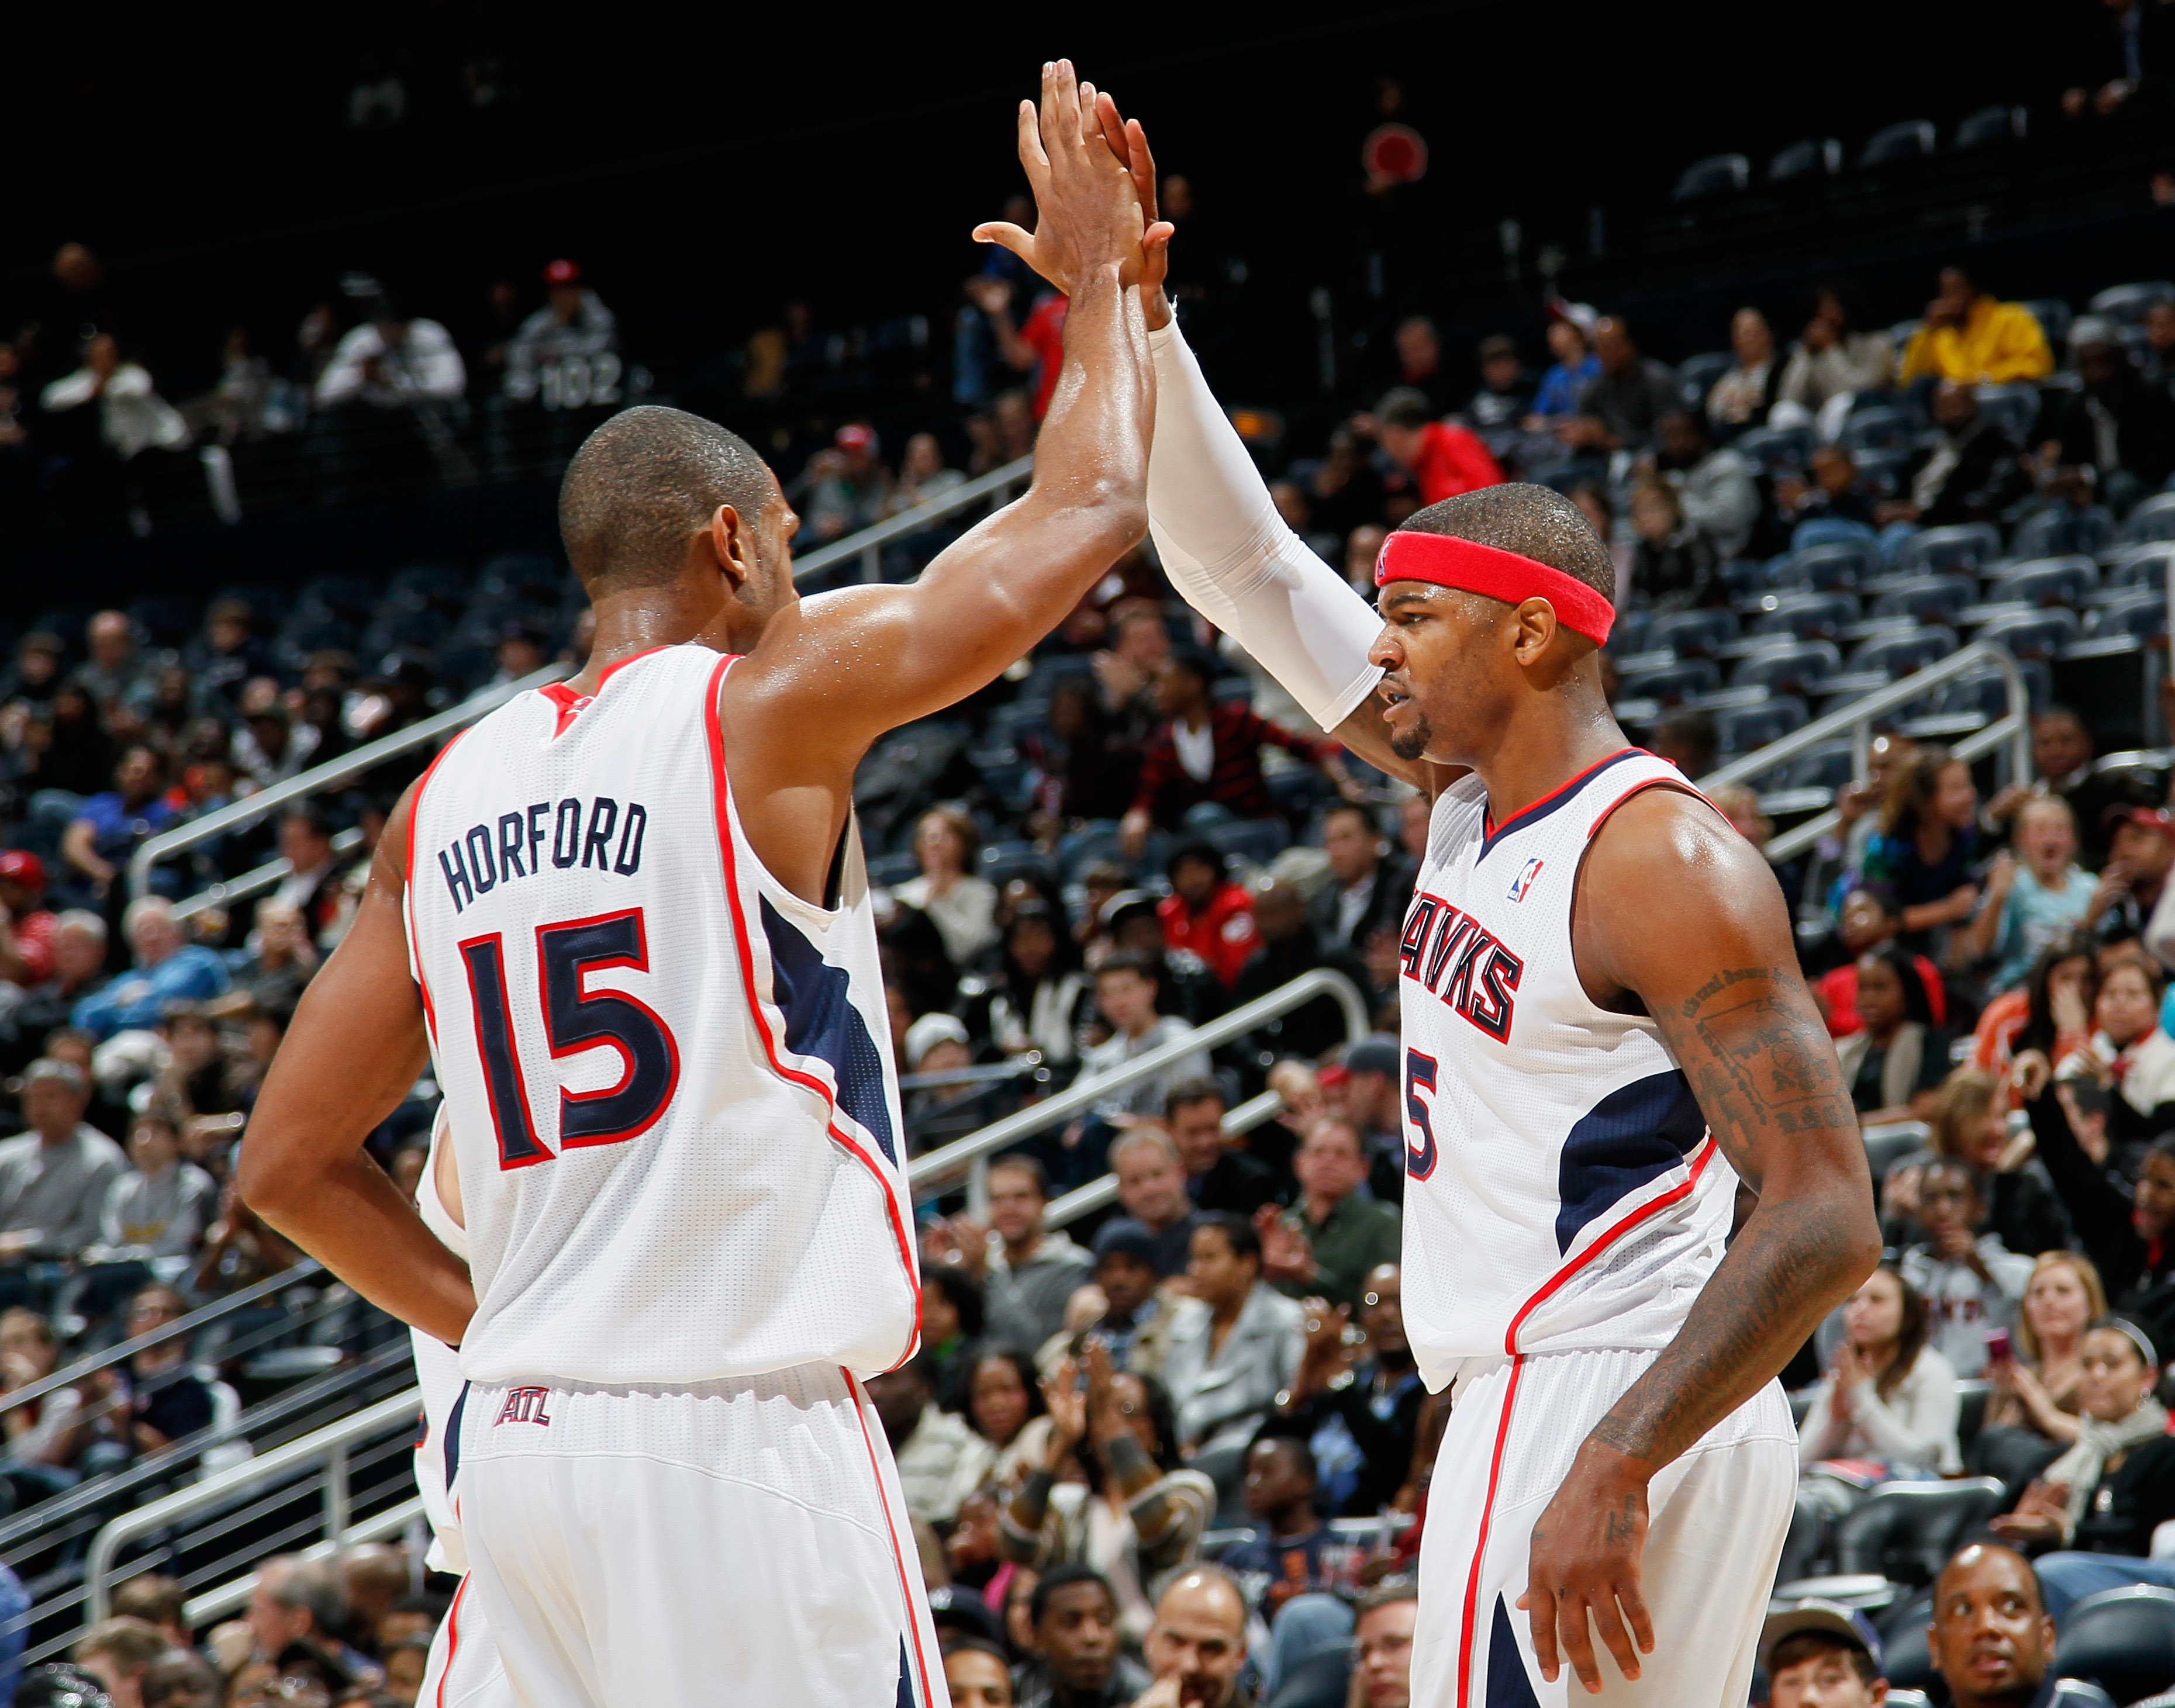 ATLANTA, GA - DECEMBER 11:  Josh Smith #5 and Al Horford #15 of the Atlanta Hawks react after Smith's basket and foul against the Indiana Pacers at Philips Arena on December 11, 2010 in Atlanta, Georgia.  NOTE TO USER: User expressly acknowledges and agre